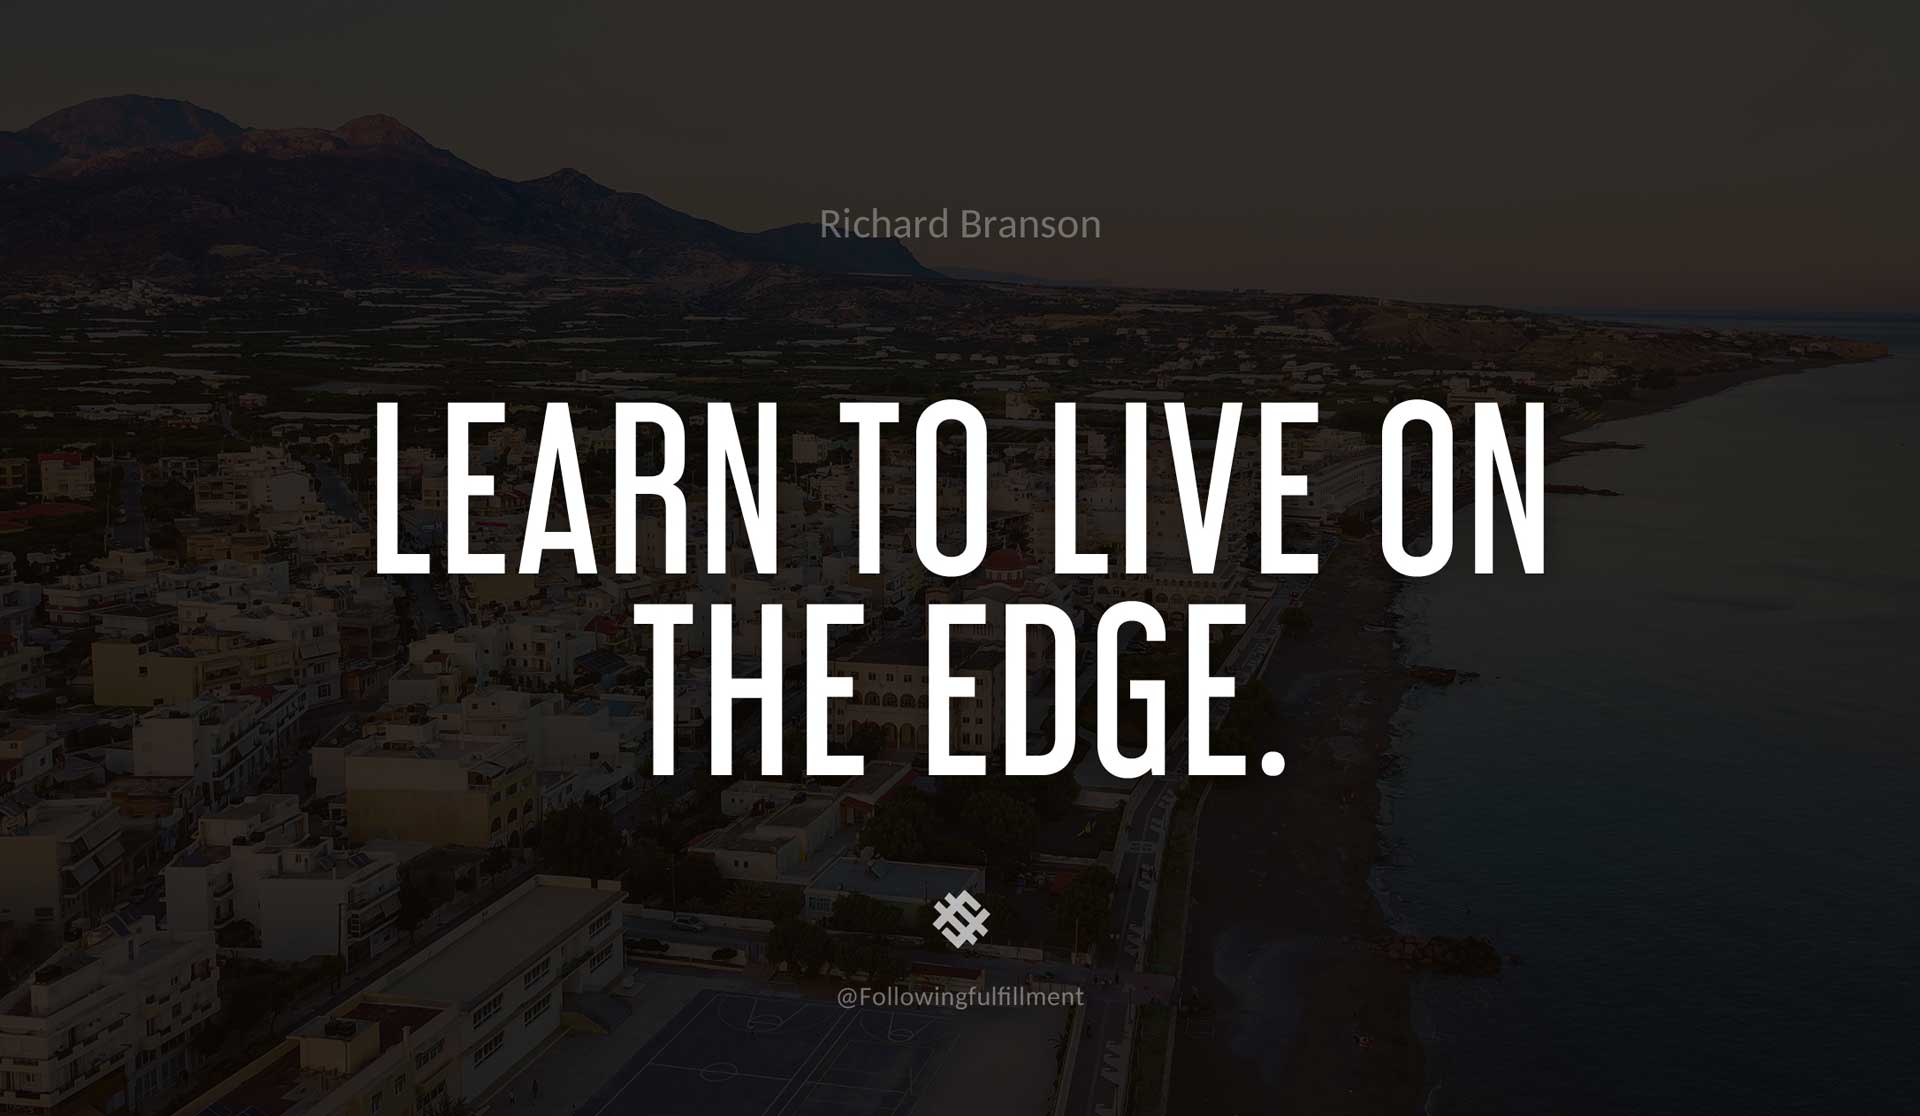 Learn-to-live-on-the-edge.-RICHARD-BRANSON-Quote.jpg